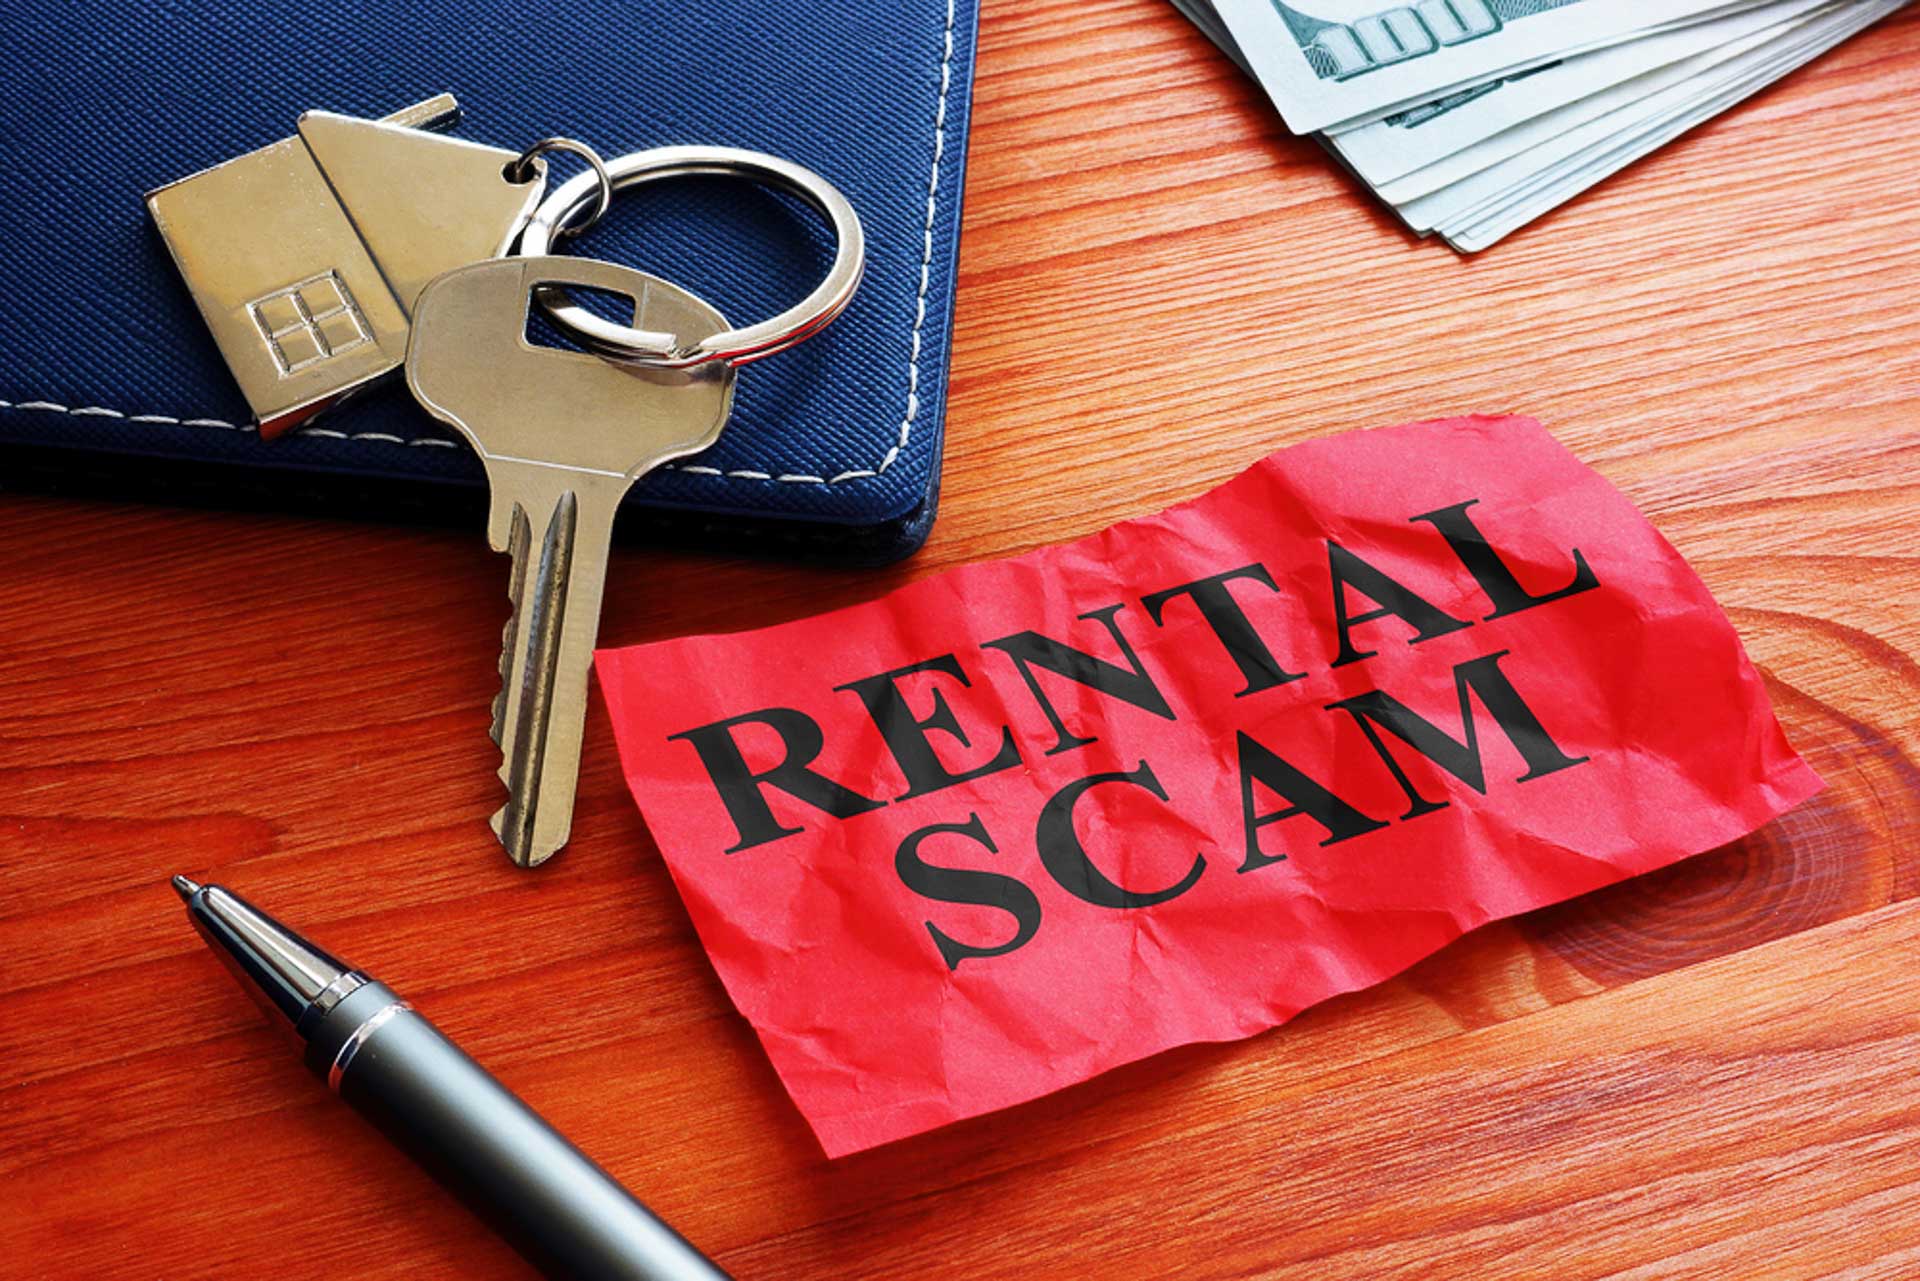 Rental Scams and How to Avoid Them 1